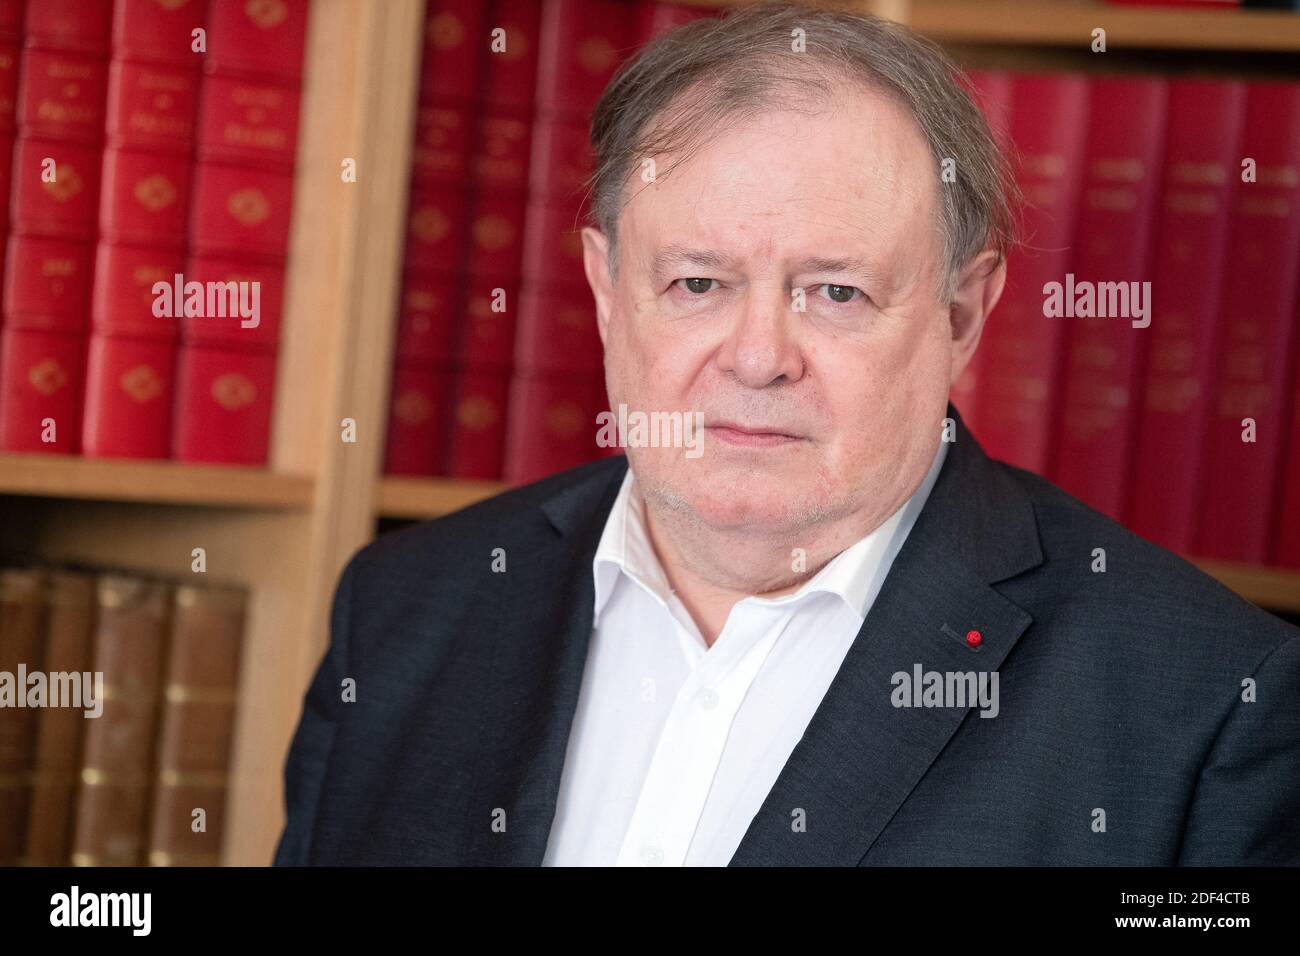 Lawyer Jean-Pierre Mignard poses at his office in Paris, France on March  02, 2020. Jean-Pierre Mignard was admitted to the Paris Bar in 1994.  Specialized in press and communication law, literary and